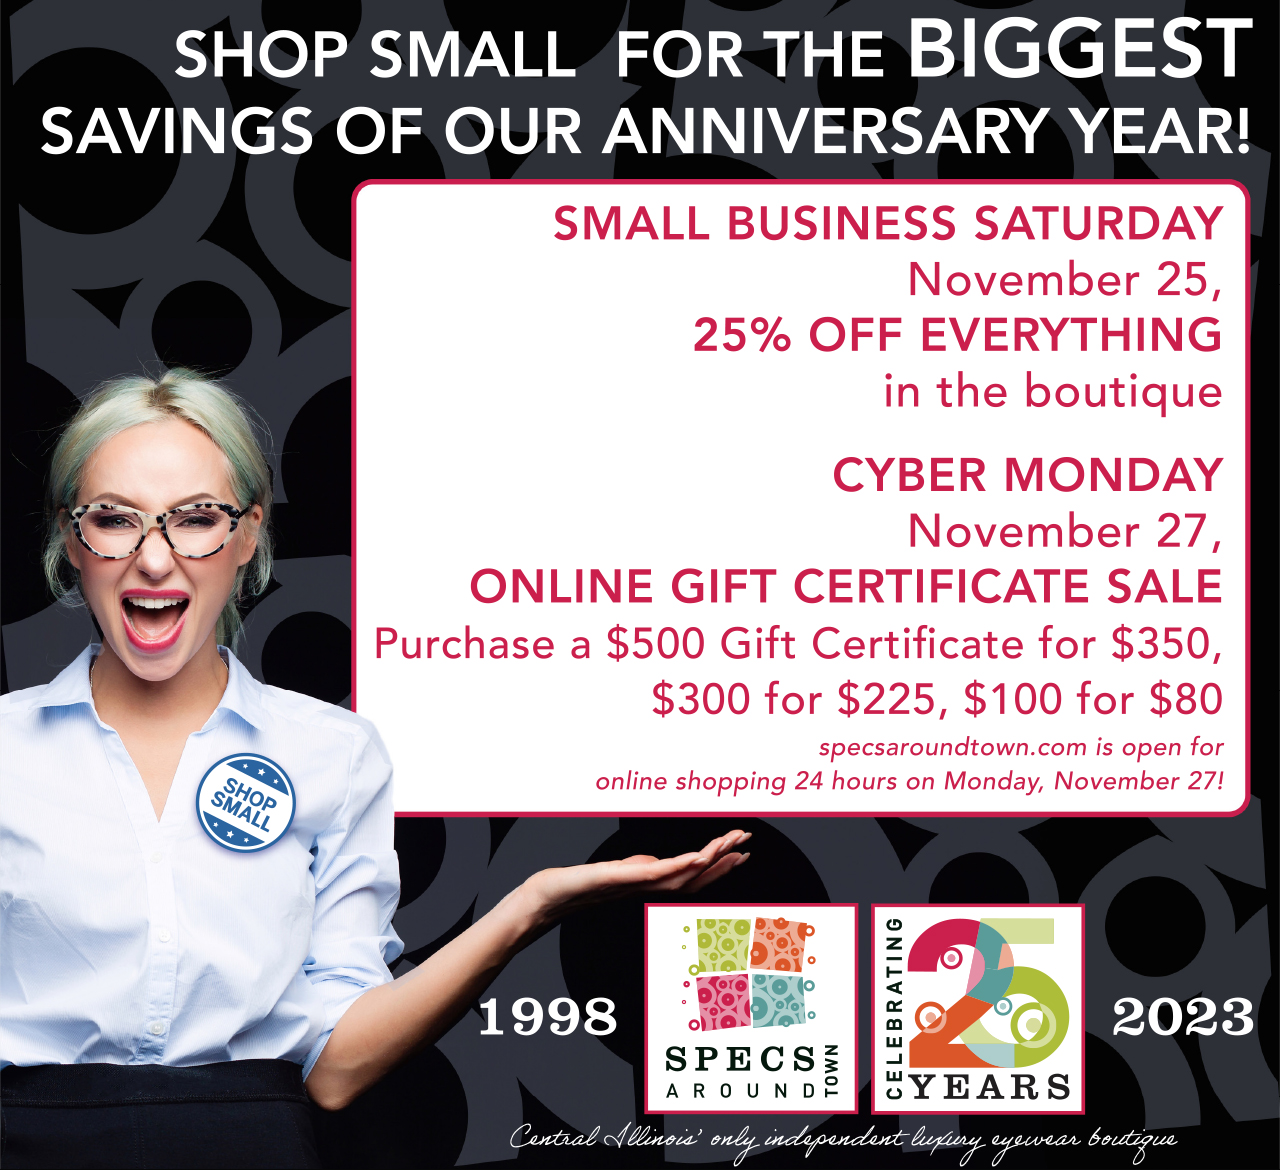 Small Business Saturday and Cyber Monday 